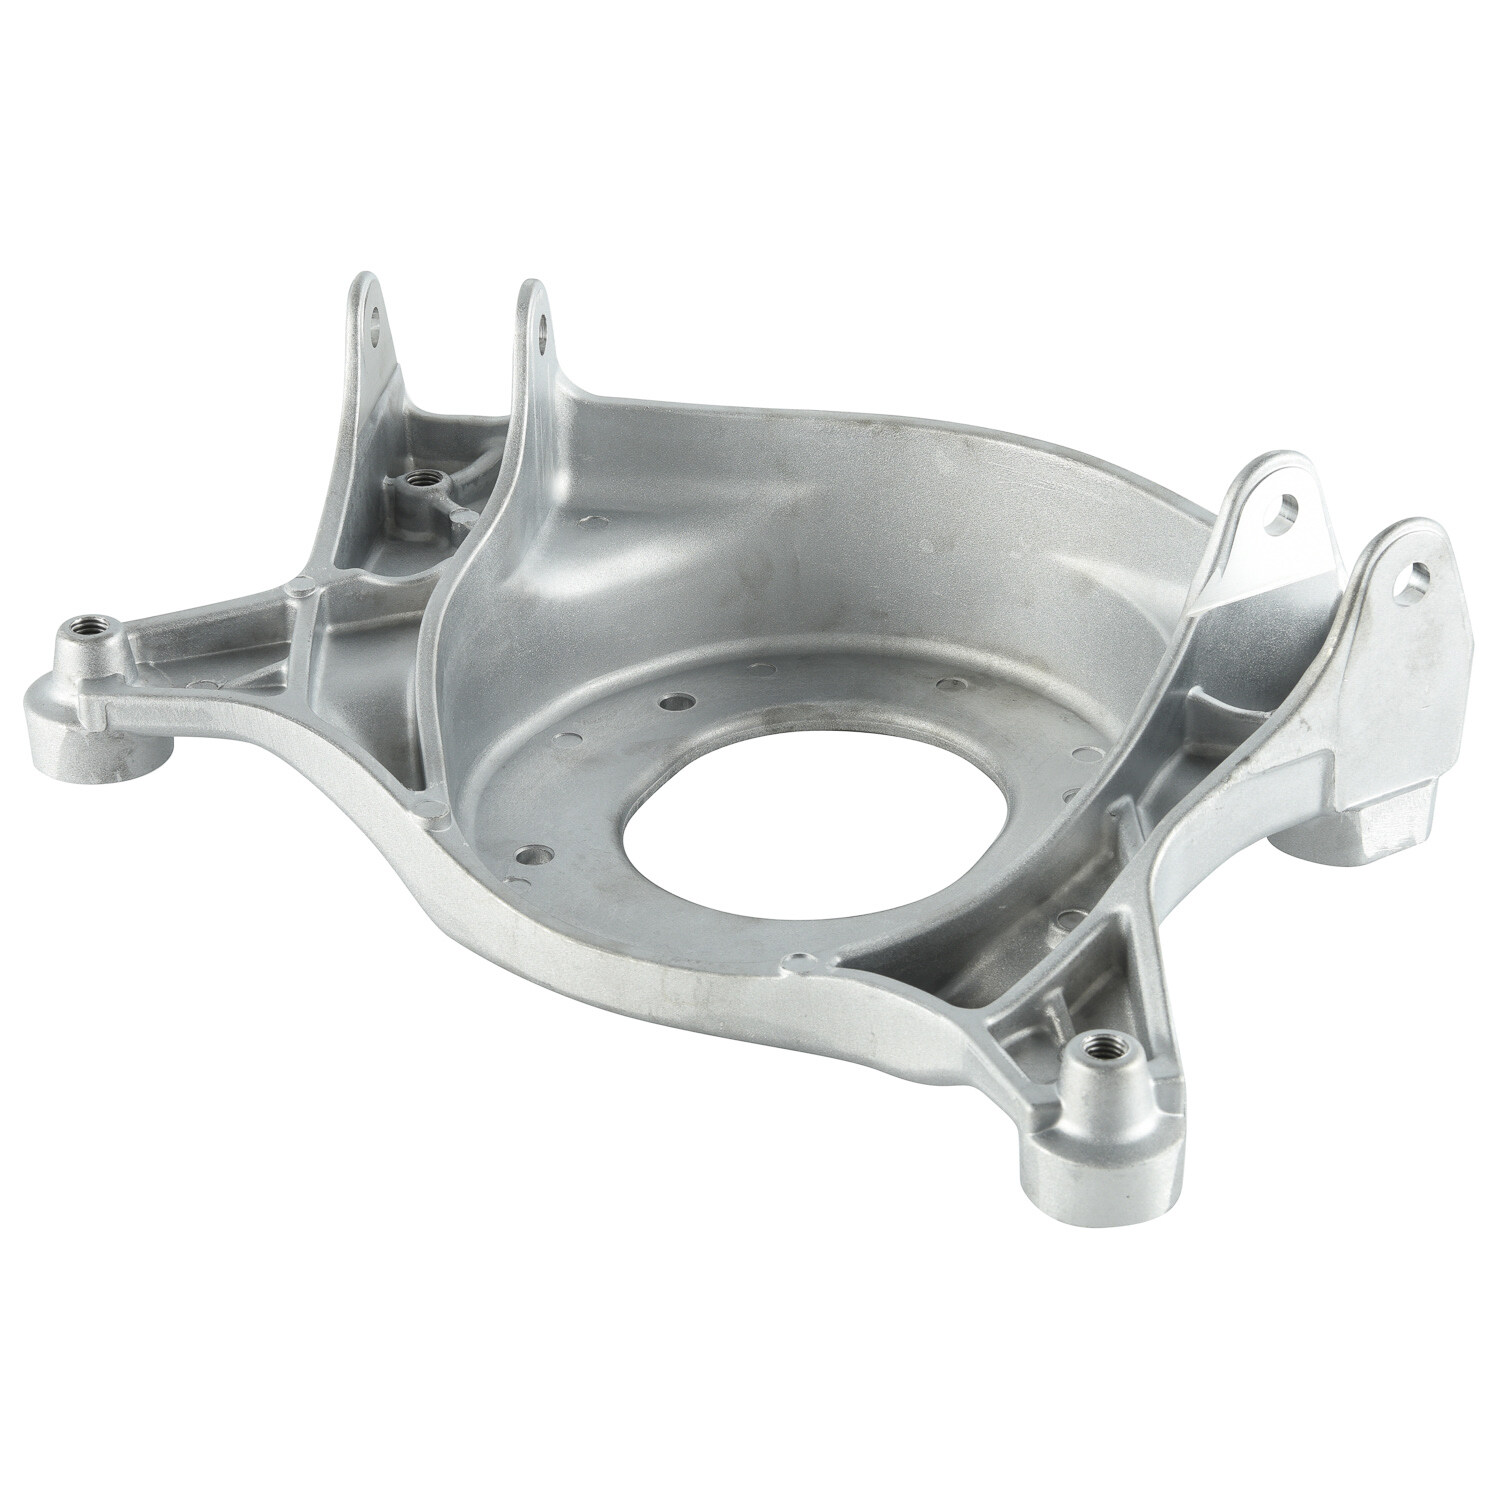 China products/suppliers. Industry Spare Parts Aluminum Alloy Housing Die Casting